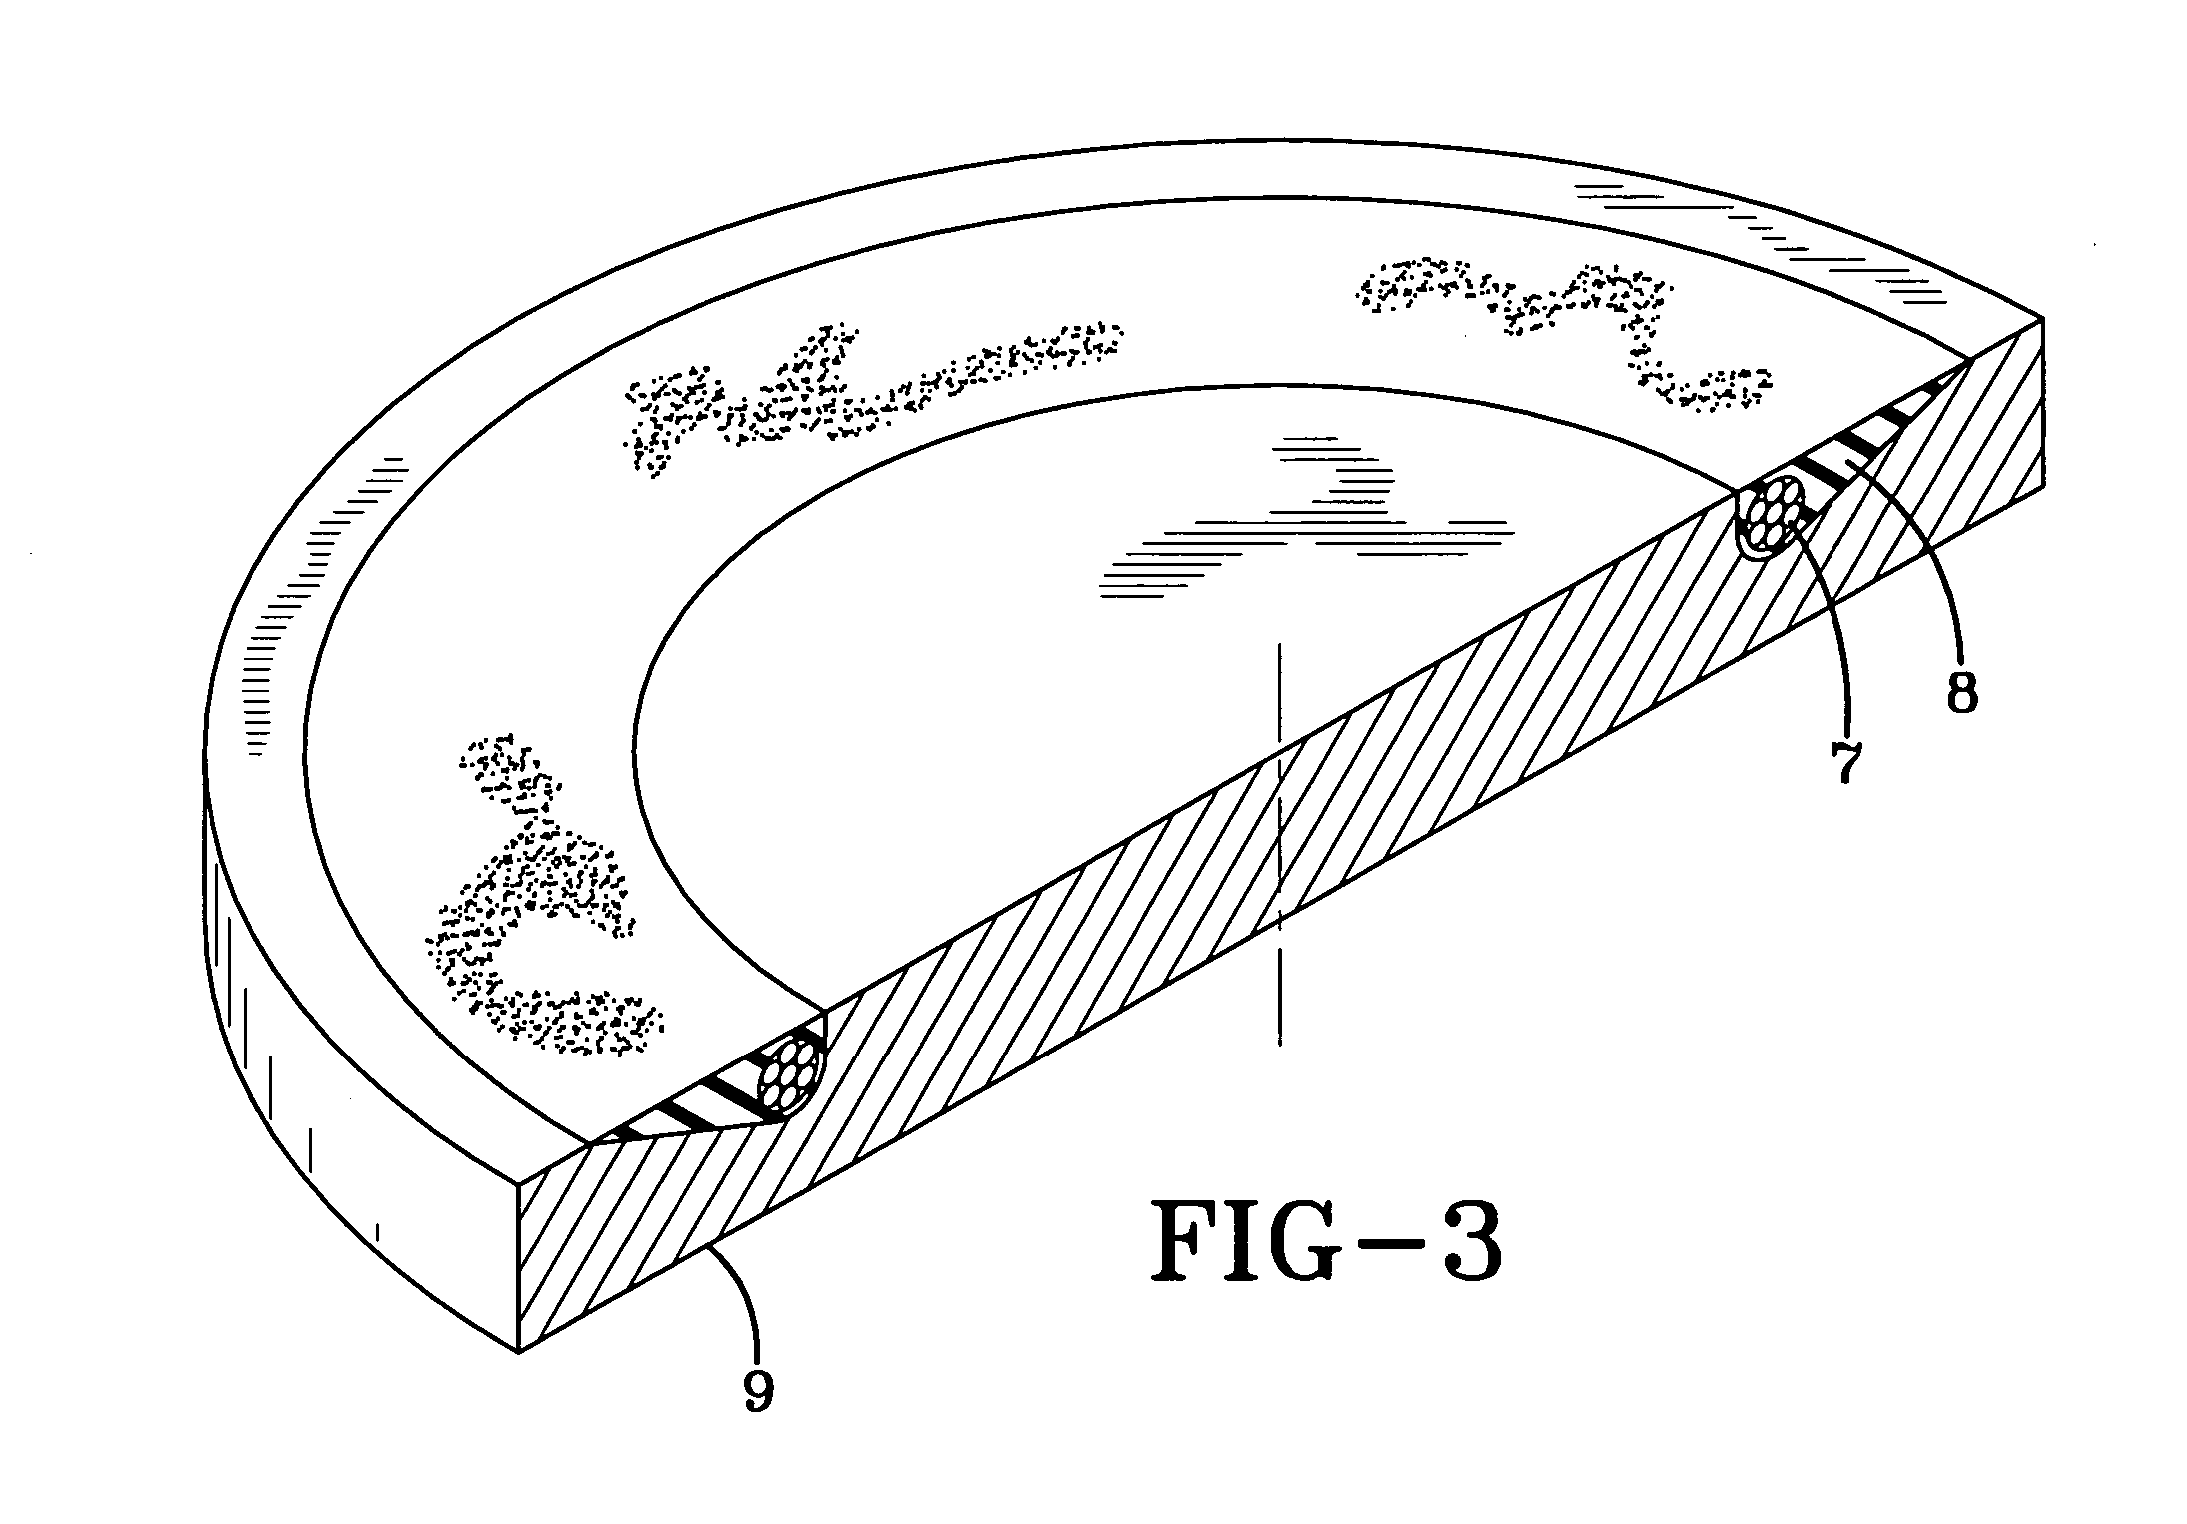 Manufacturing method for a reinforced liquid elastomer tire